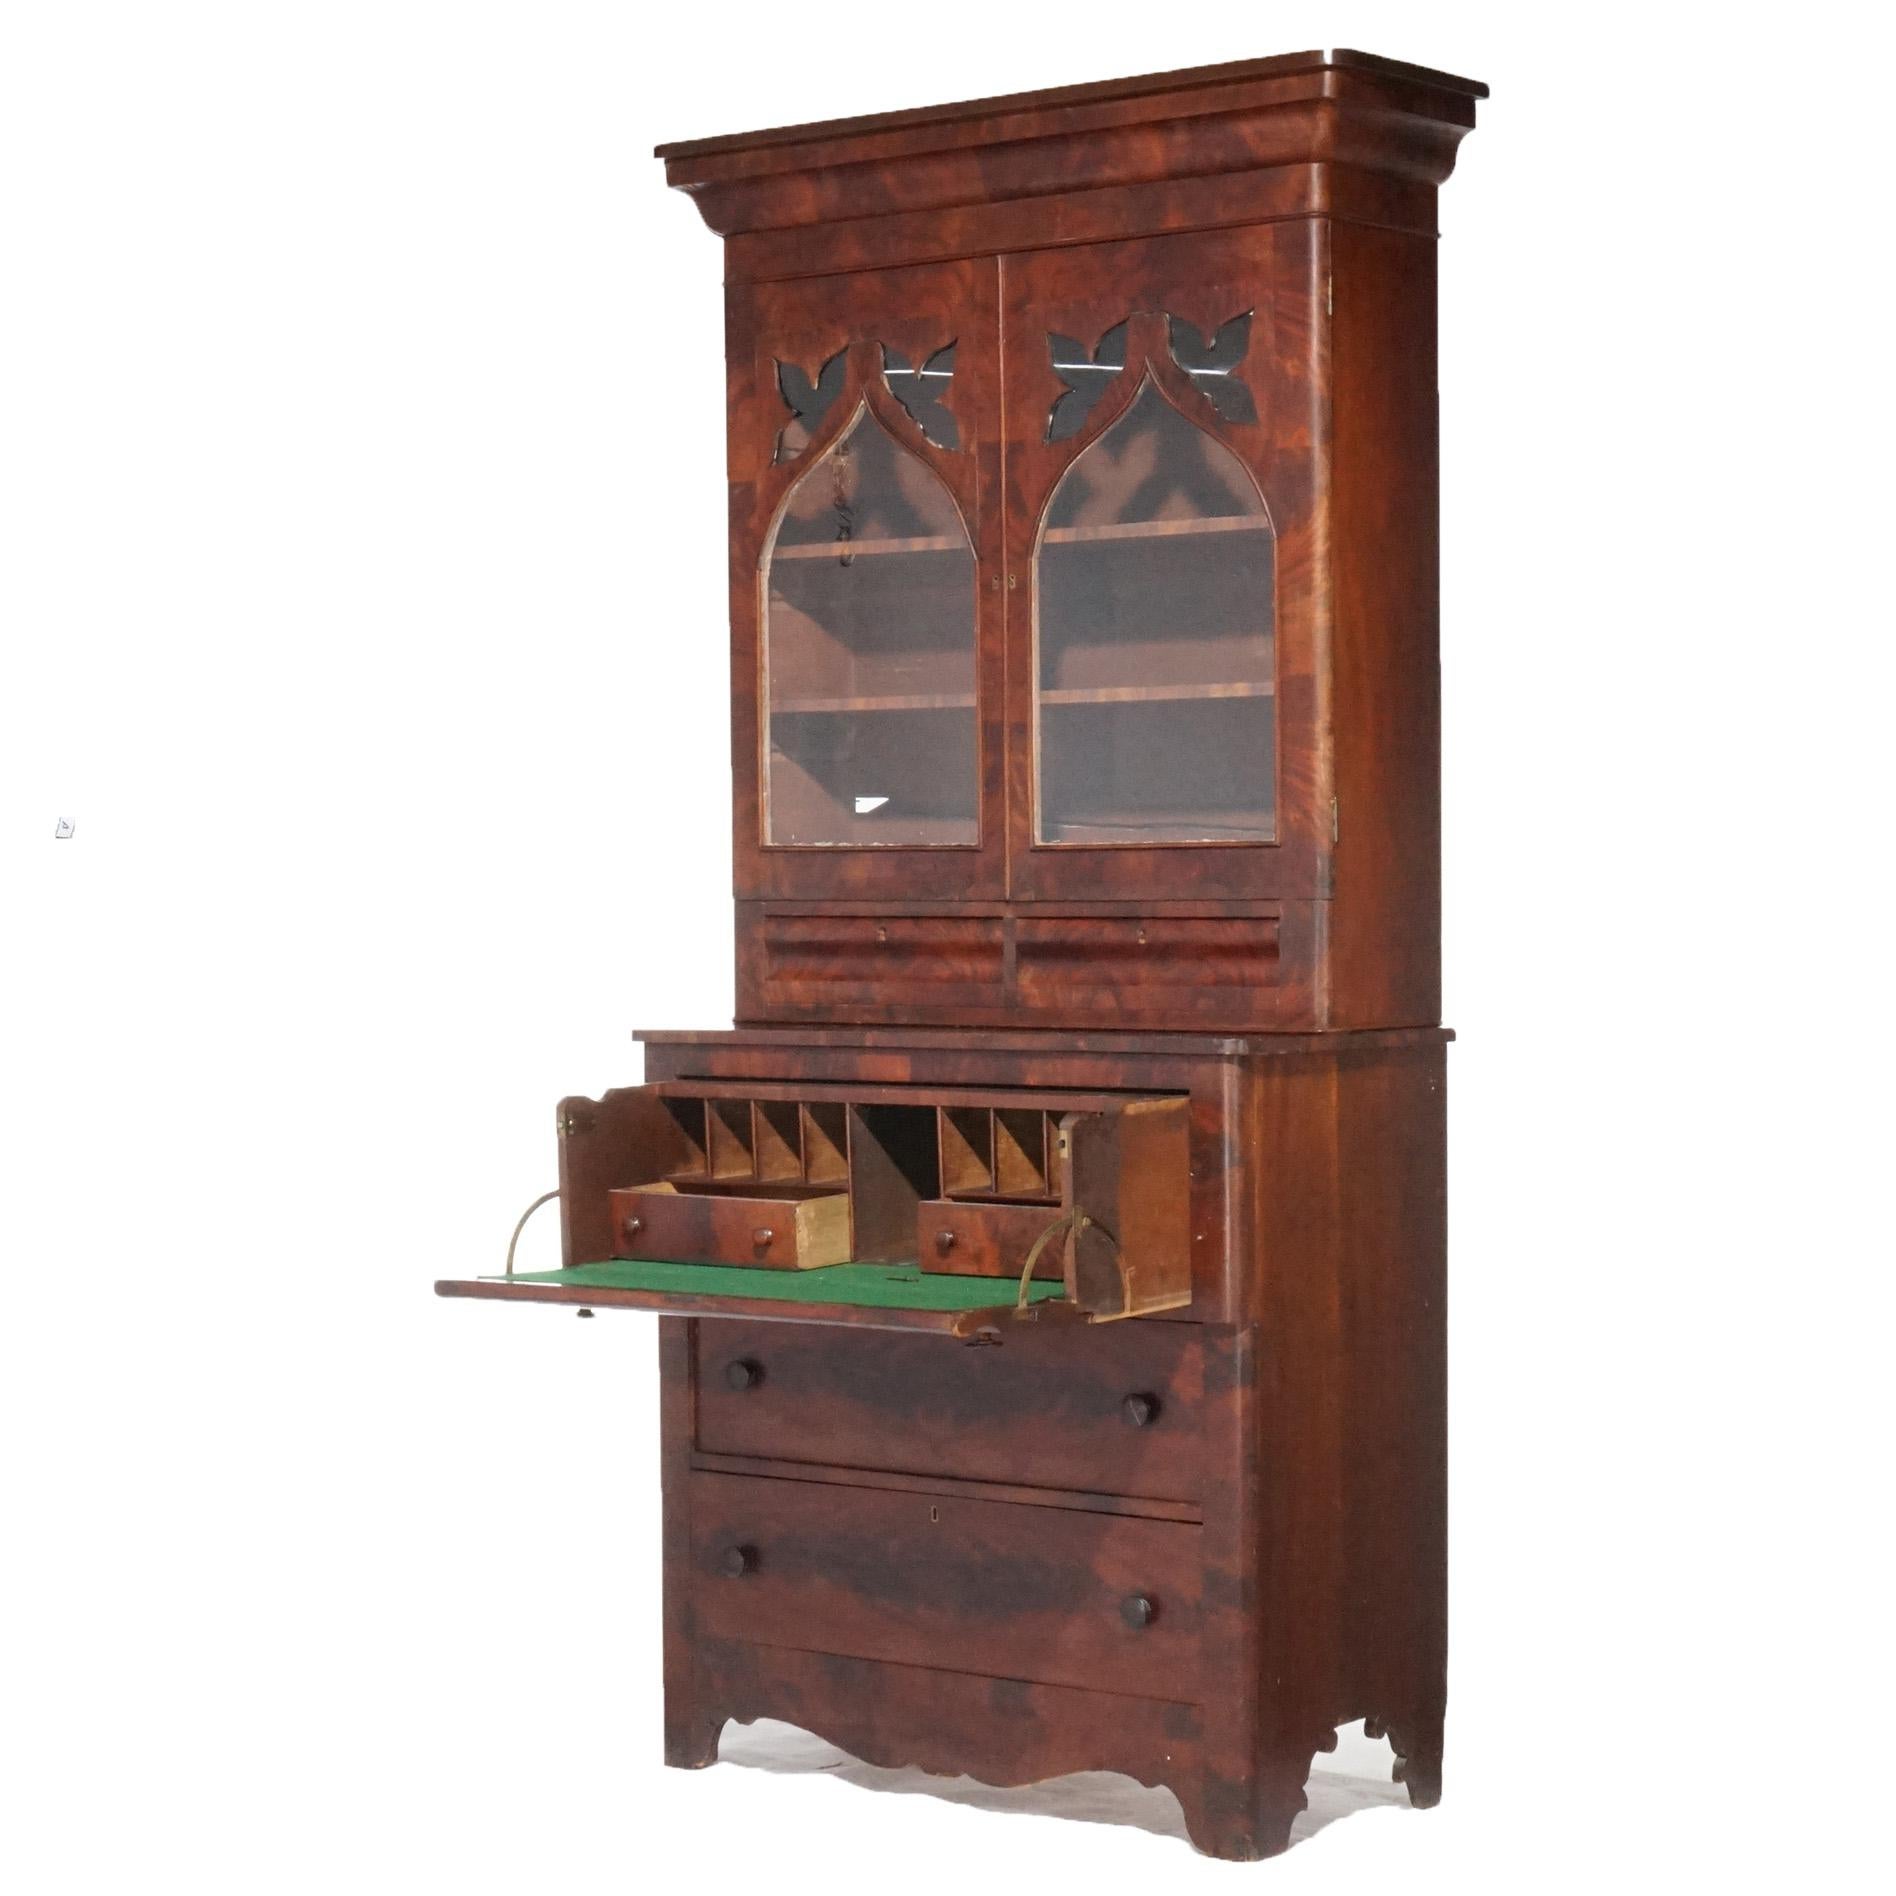 An antique American Empire secretary in the manner of Quervelle offers deeply striated flame mahogany construction with Greco-Roman features having upper bookcase with double glass doors with arch form overlay surmounting lower case with drop front